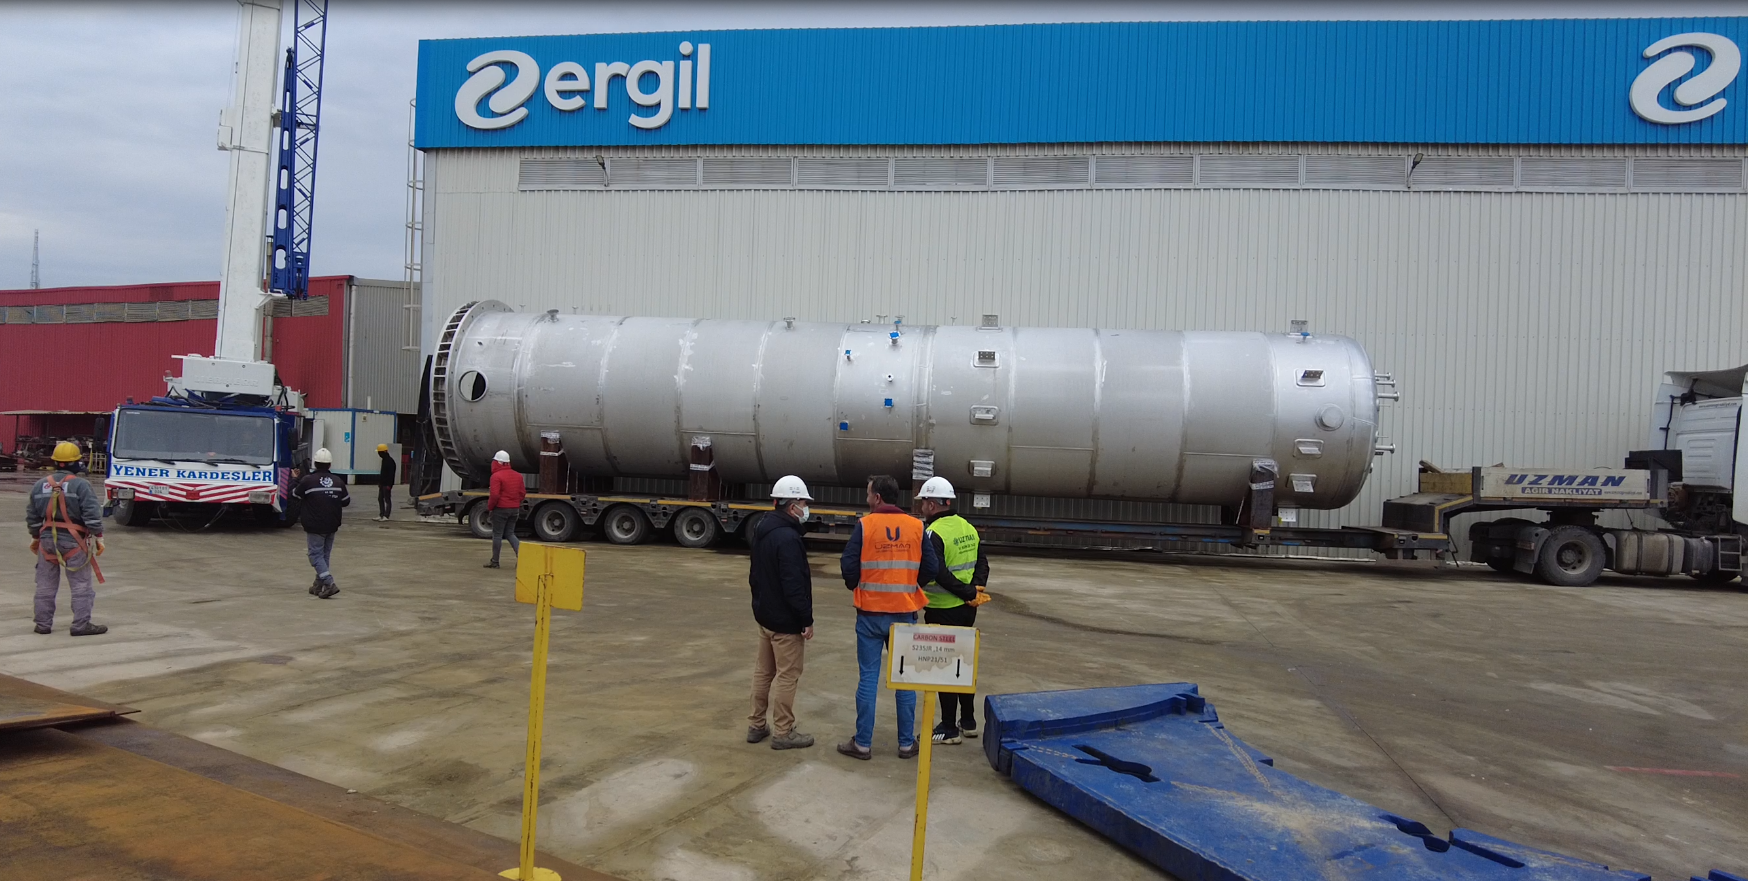 ERGIL is proud to announce the successful completion of our Distilled Nitrile & Crude Nitrile Vessel project 52